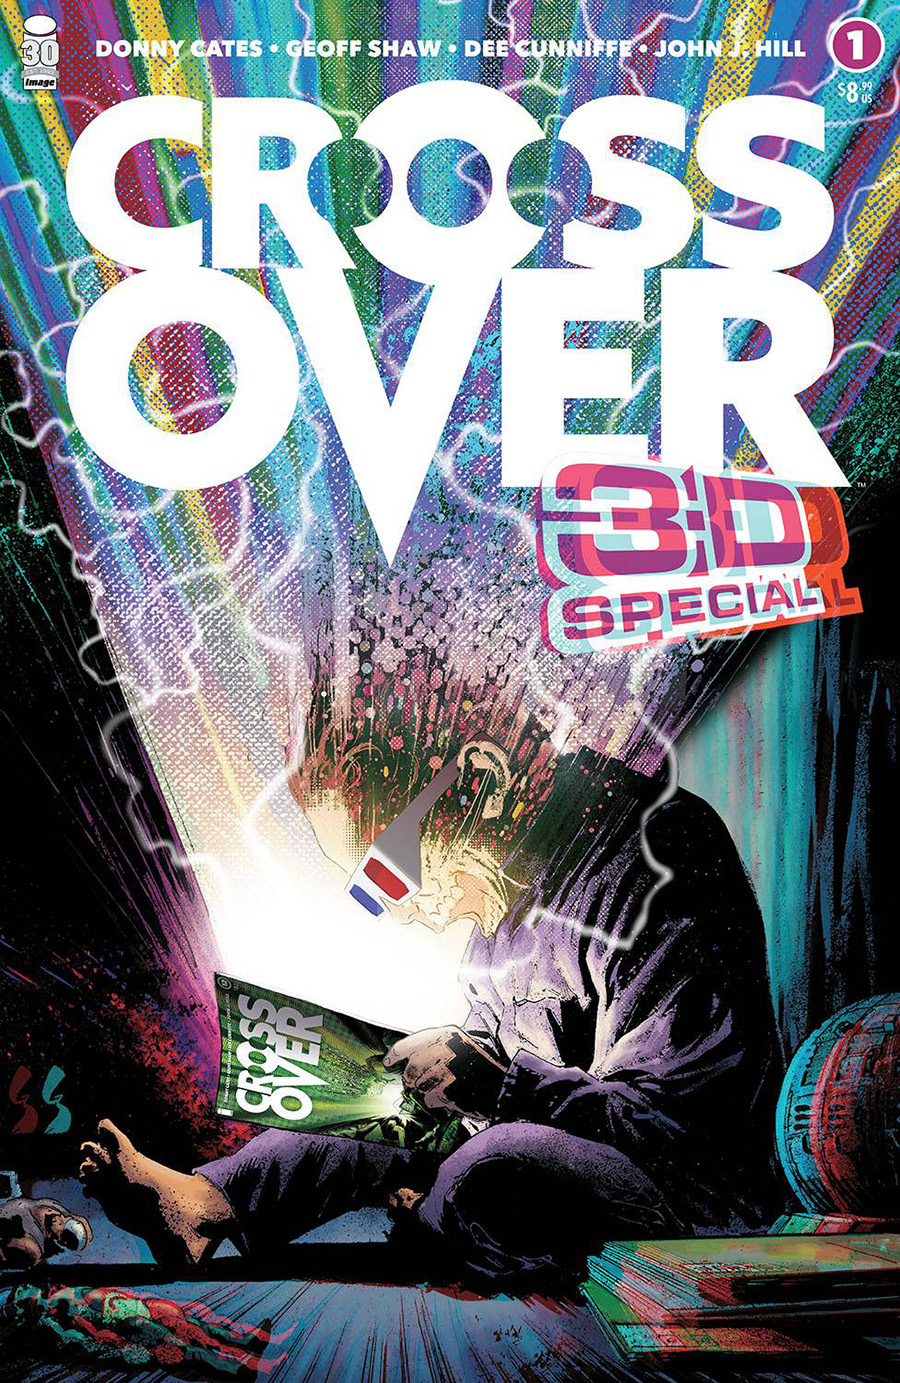 Crossover 3D Special #1